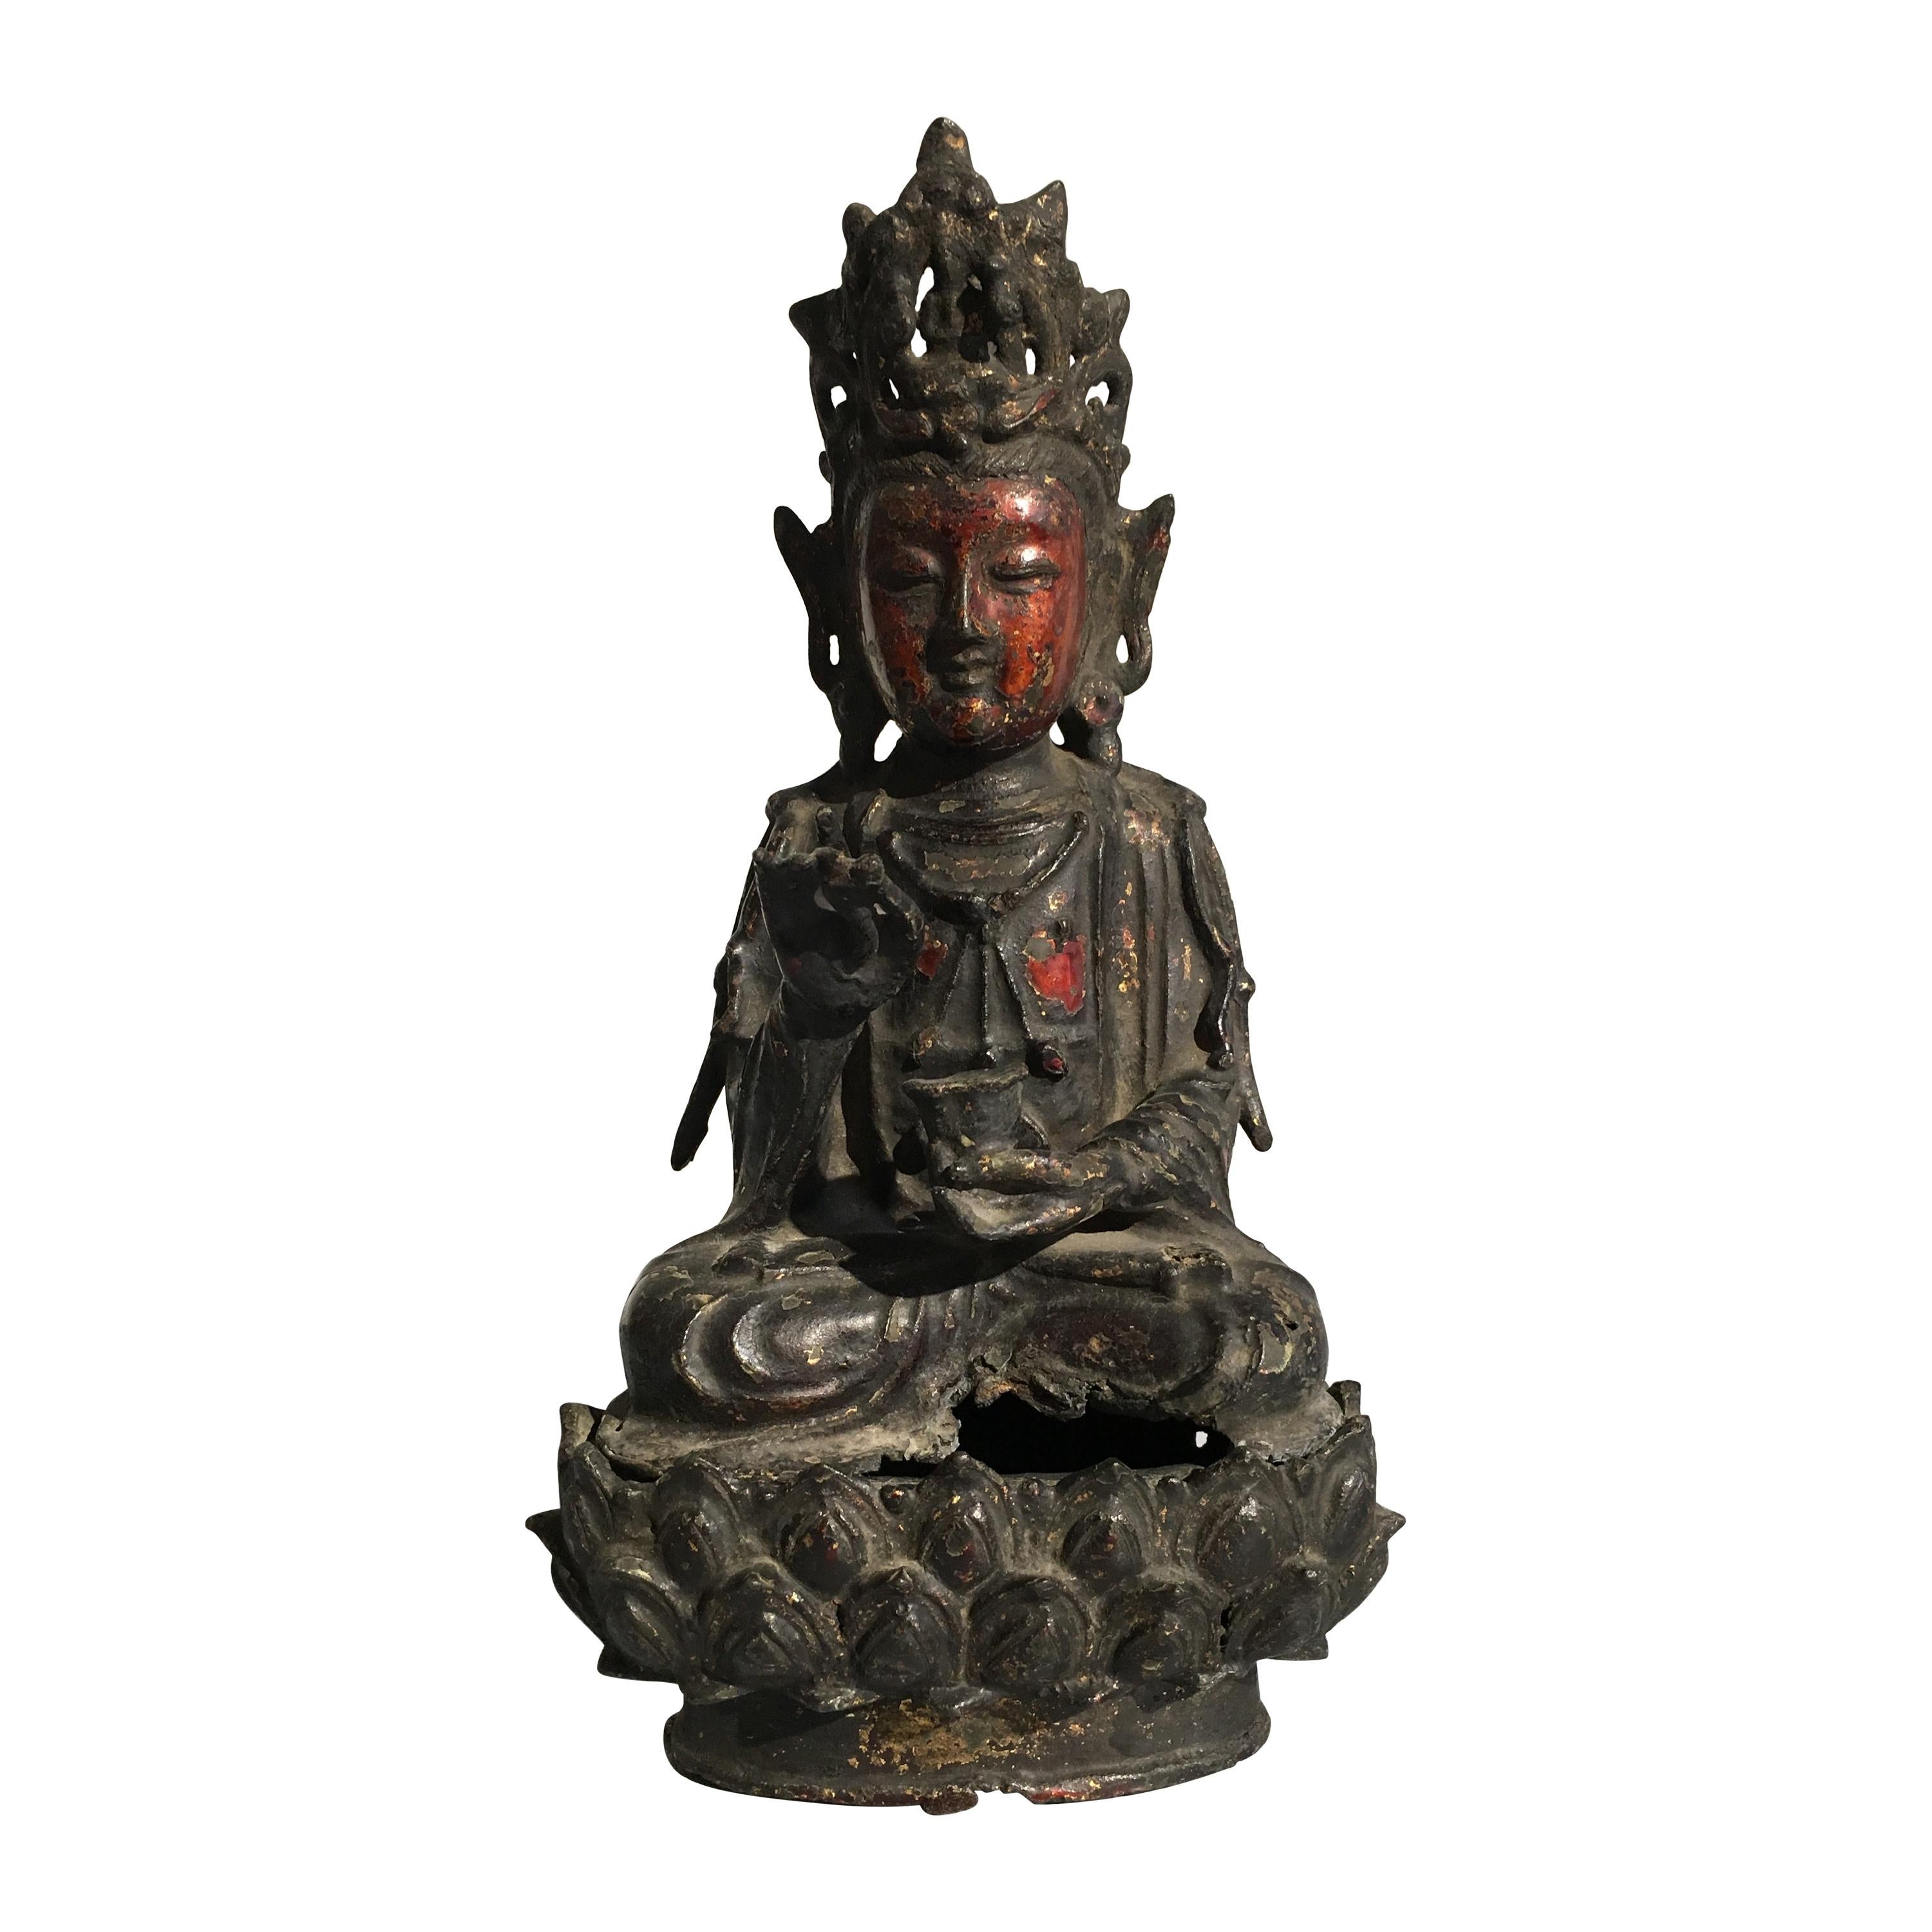 Chinese Ming Dynasty Lacquered and Gilt Bronze Bodhisattva, 17th Century